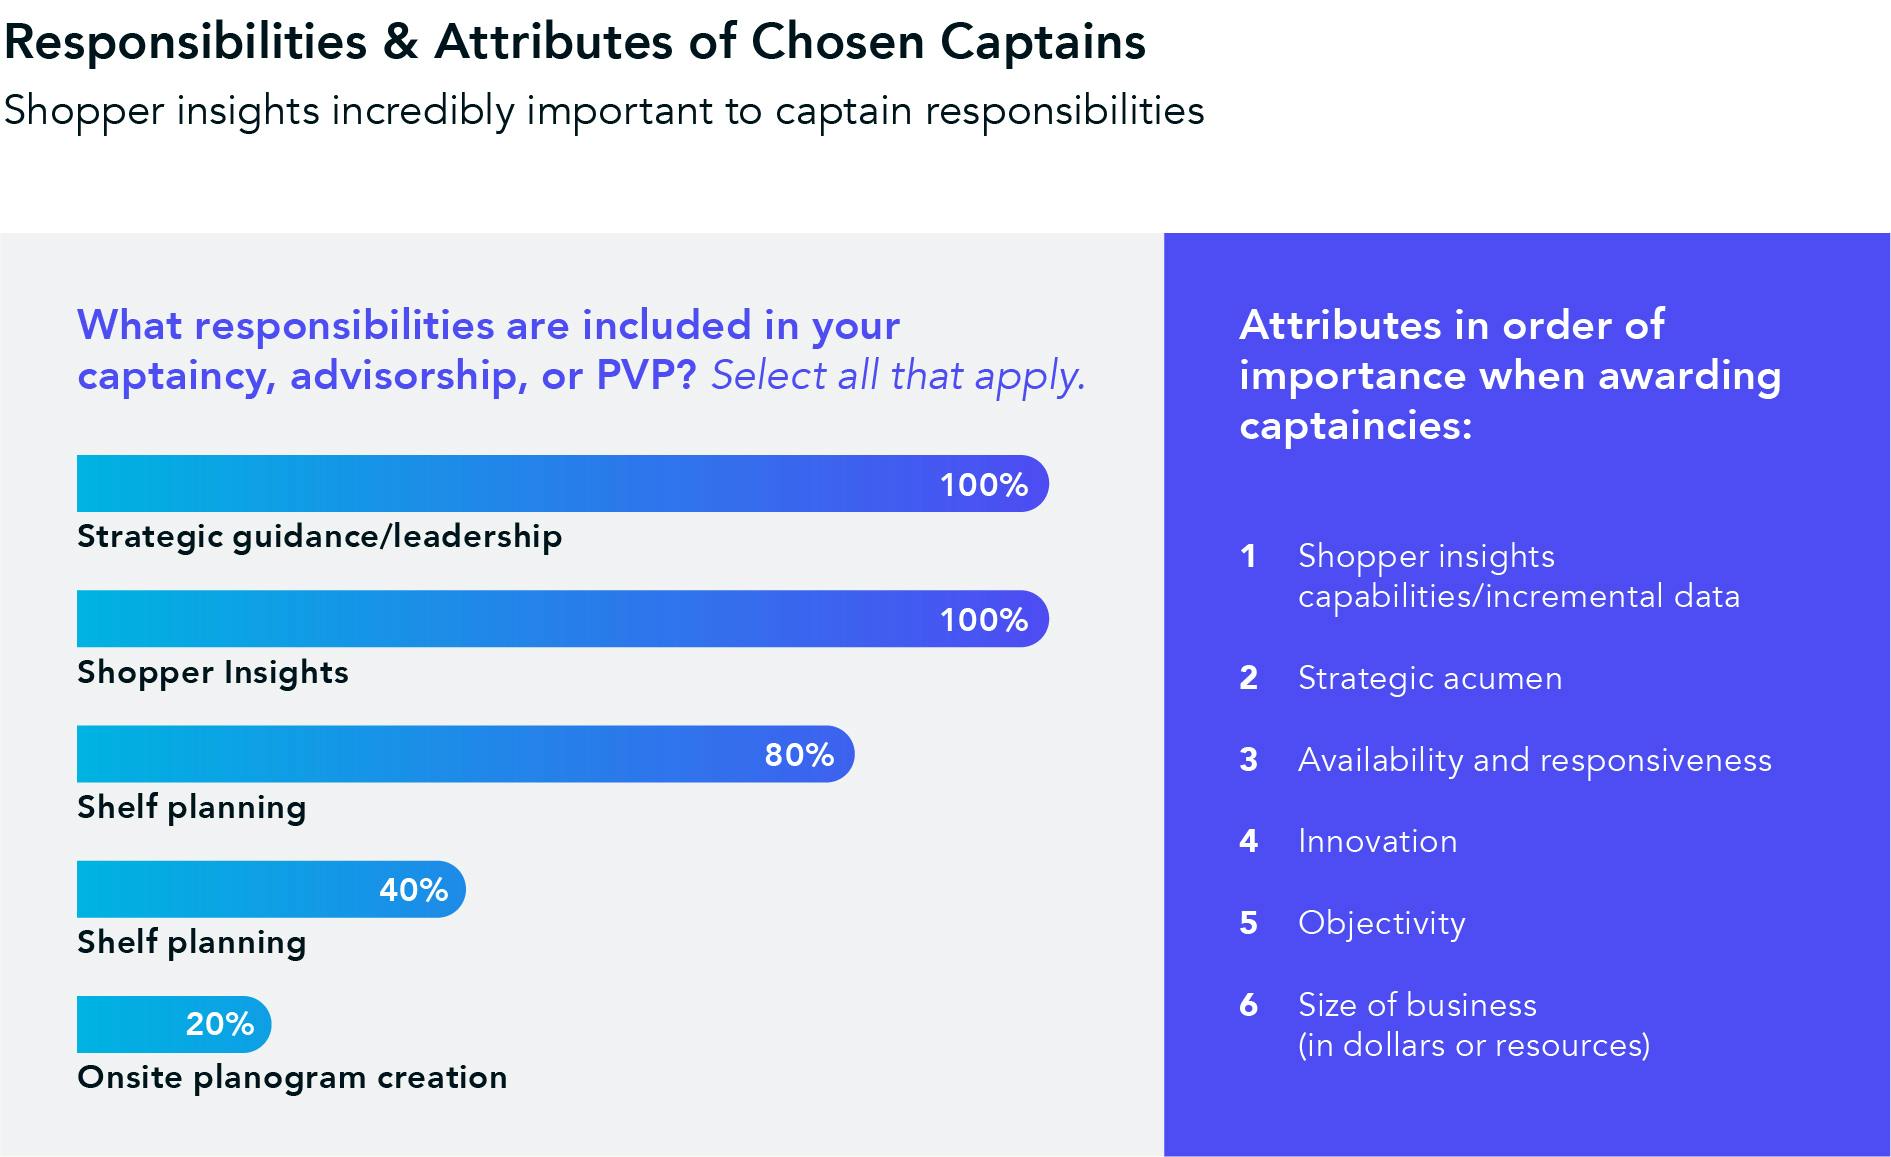 2021 Category Management Association survey revealed that strategic guidance/leadership and shopper insights